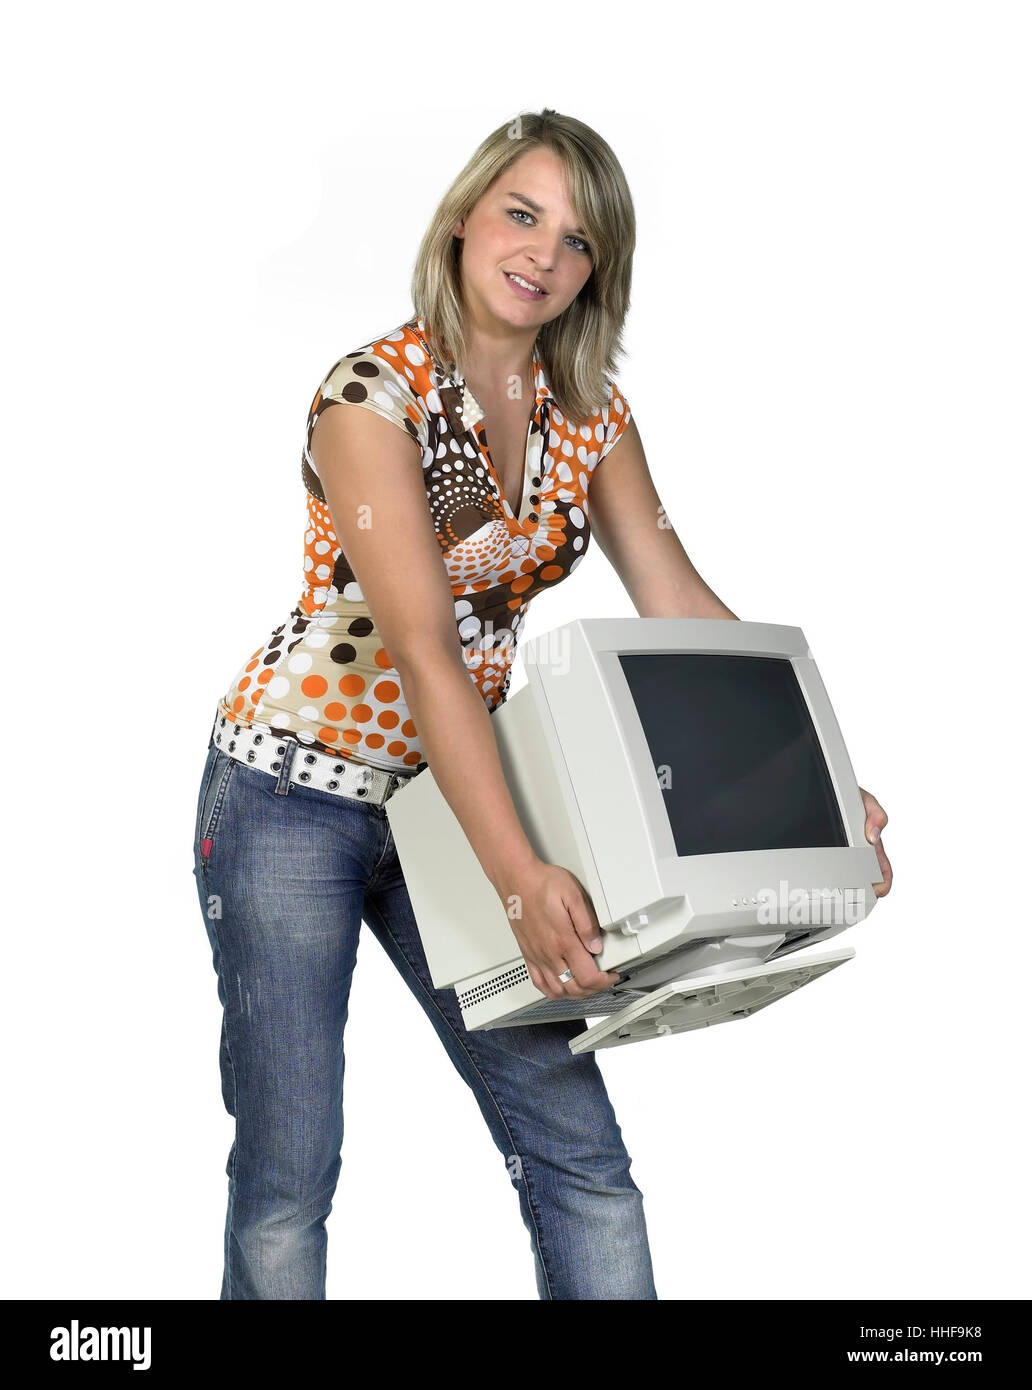 cute girl carrying a computer monitor Stock Photo